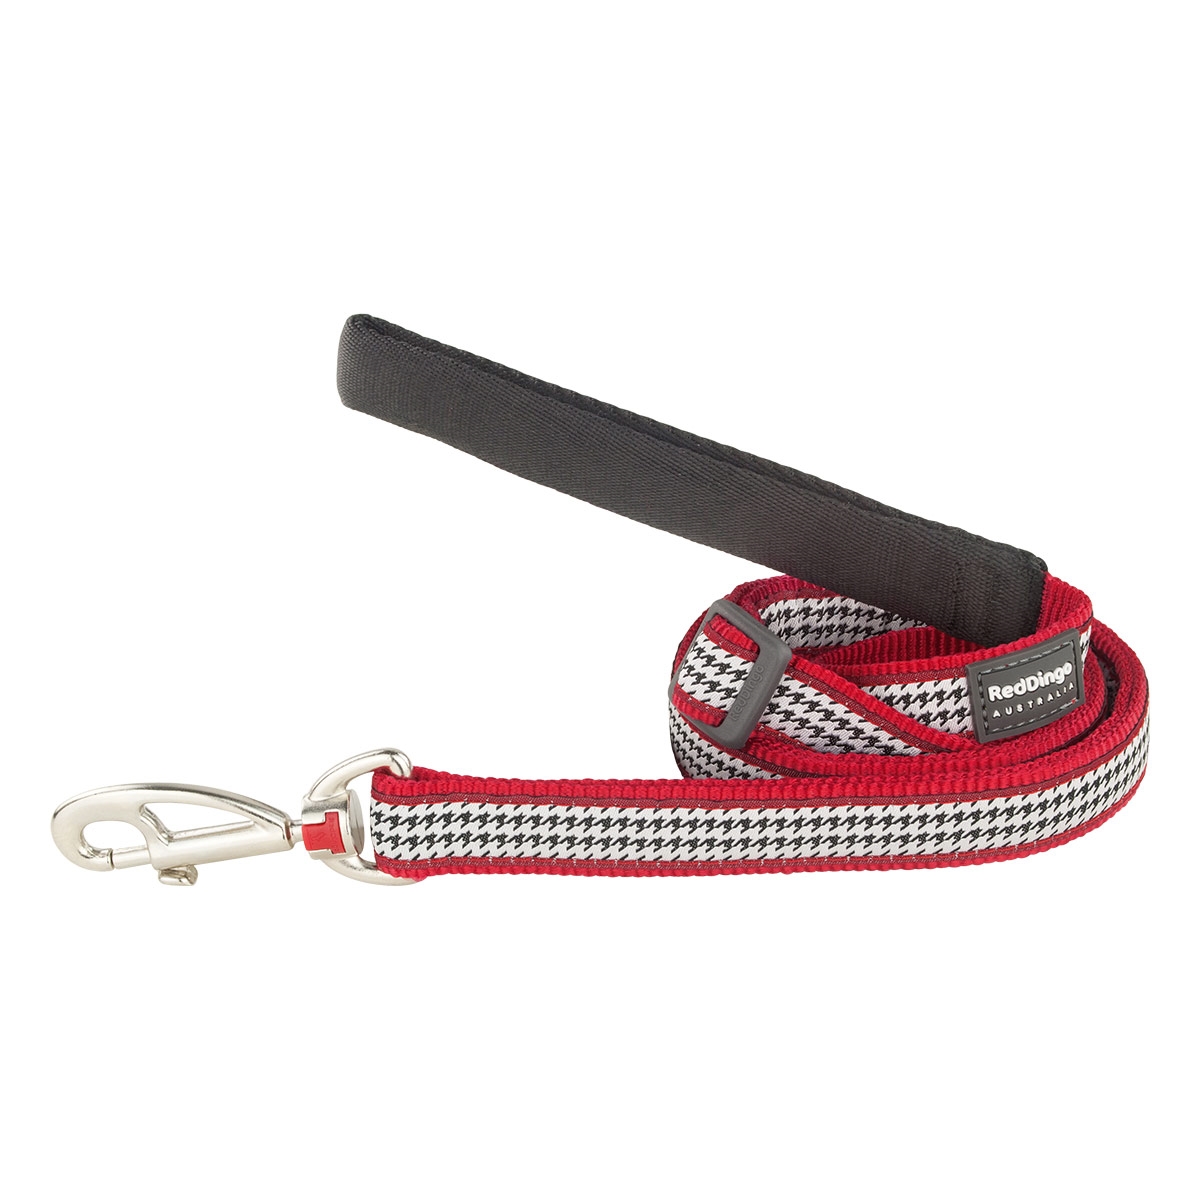 Picture of Red Dingo L6-FG-RE-20 Dog Lead Design Fang It Red - Medium 6ft